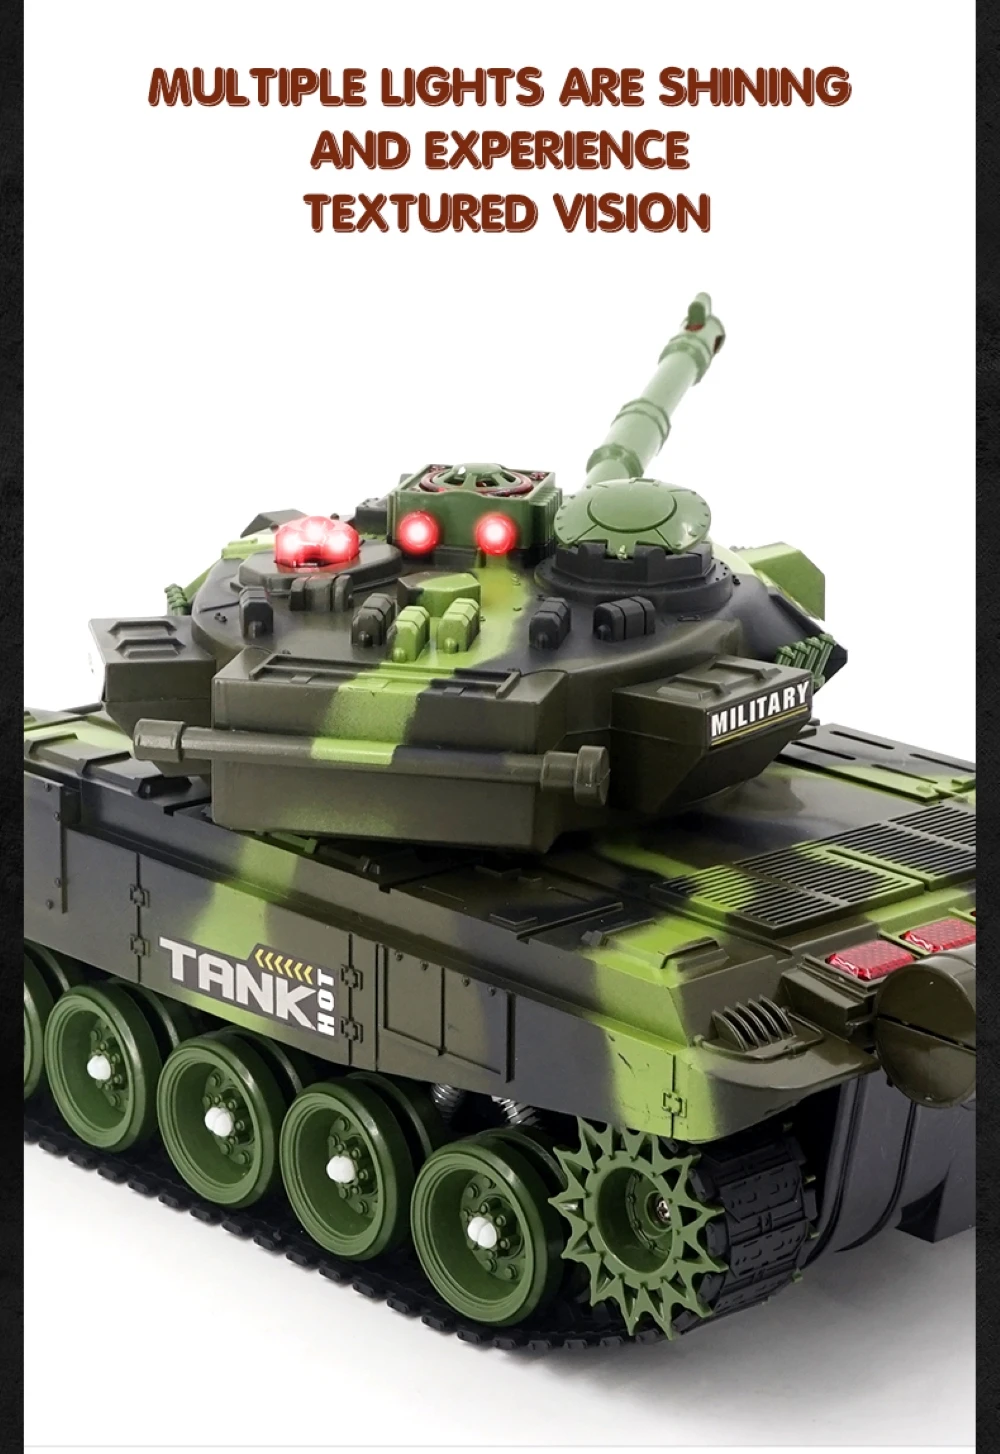 33CM Super RC tank launch cross-country tracked remote control vehicle charger battle boy toys for boys kids children Gift